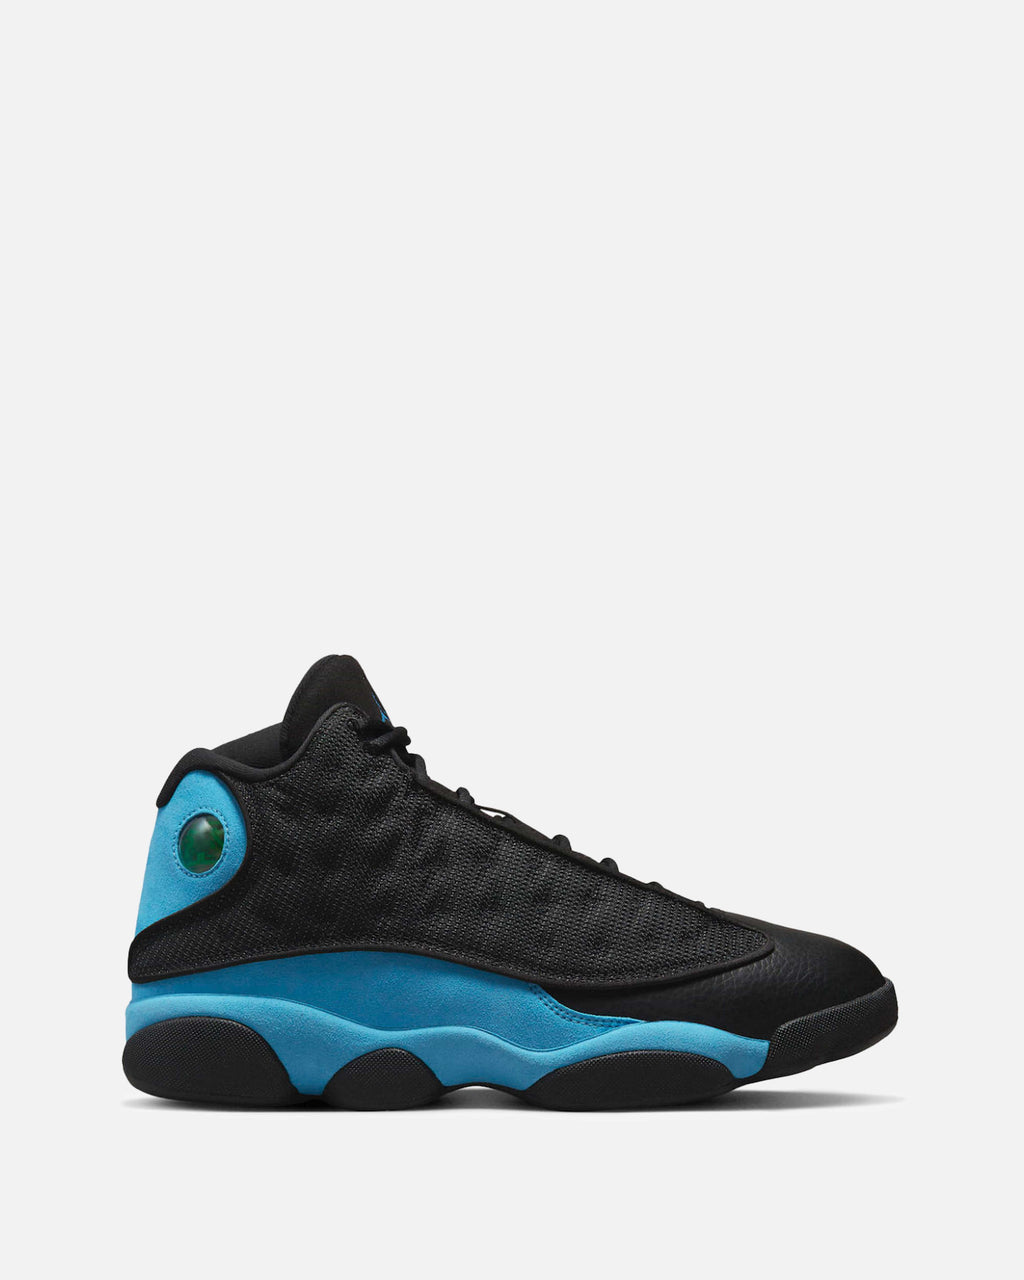 black and turquoise jordans 13